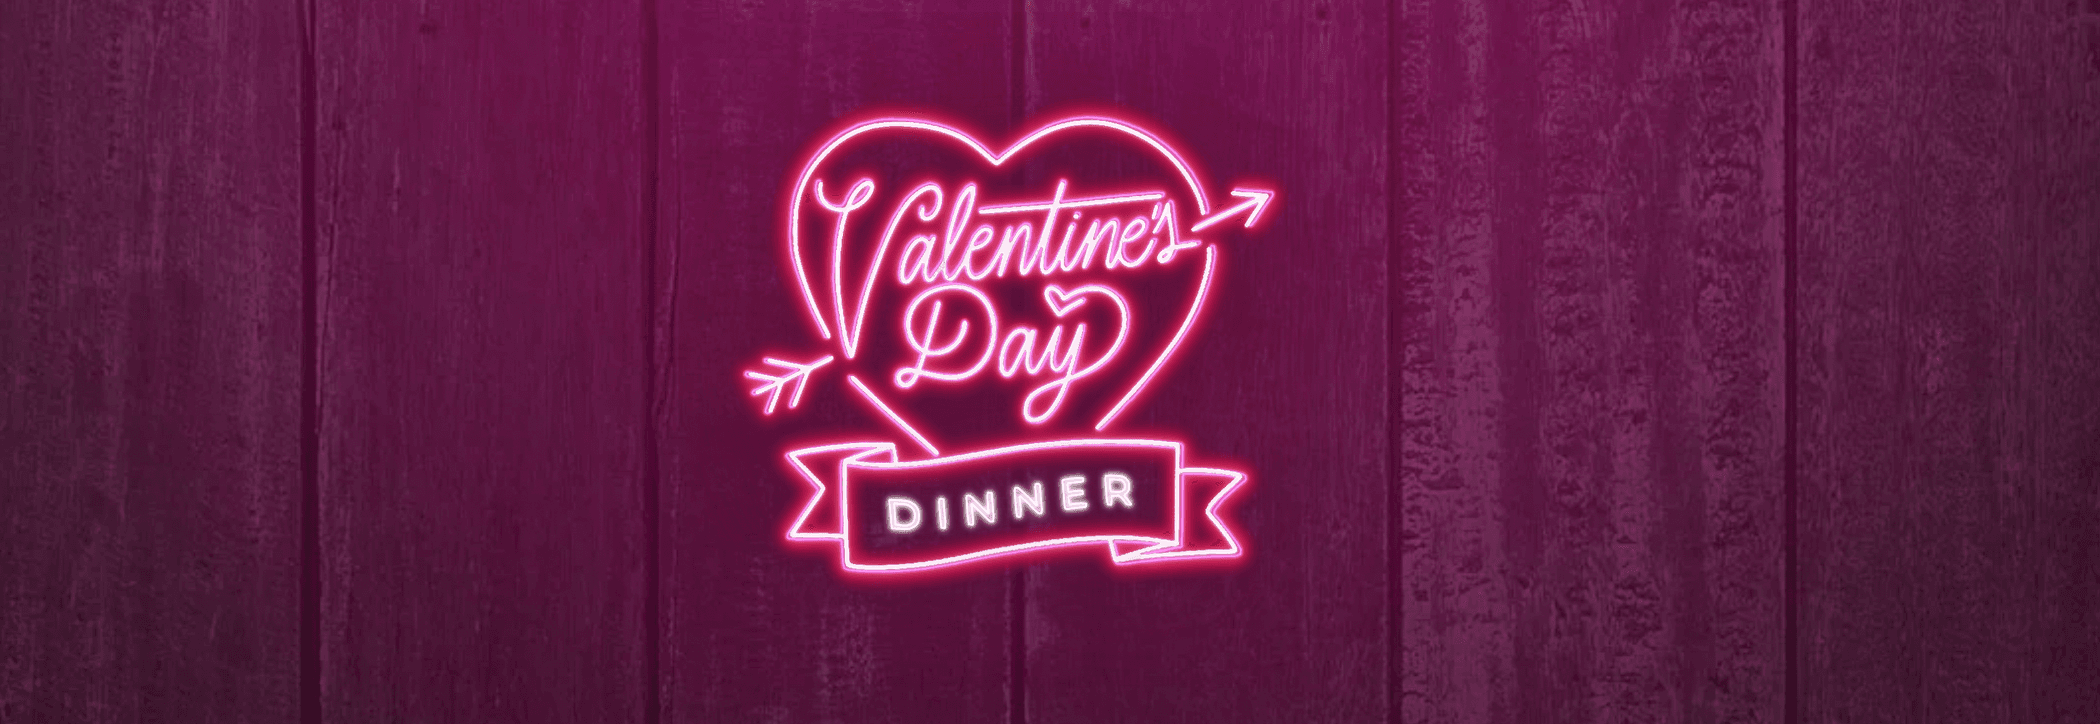 Celebrate Valentine’s Day at KAO Sushi & Grill with Romantic Multi-Course Dinner